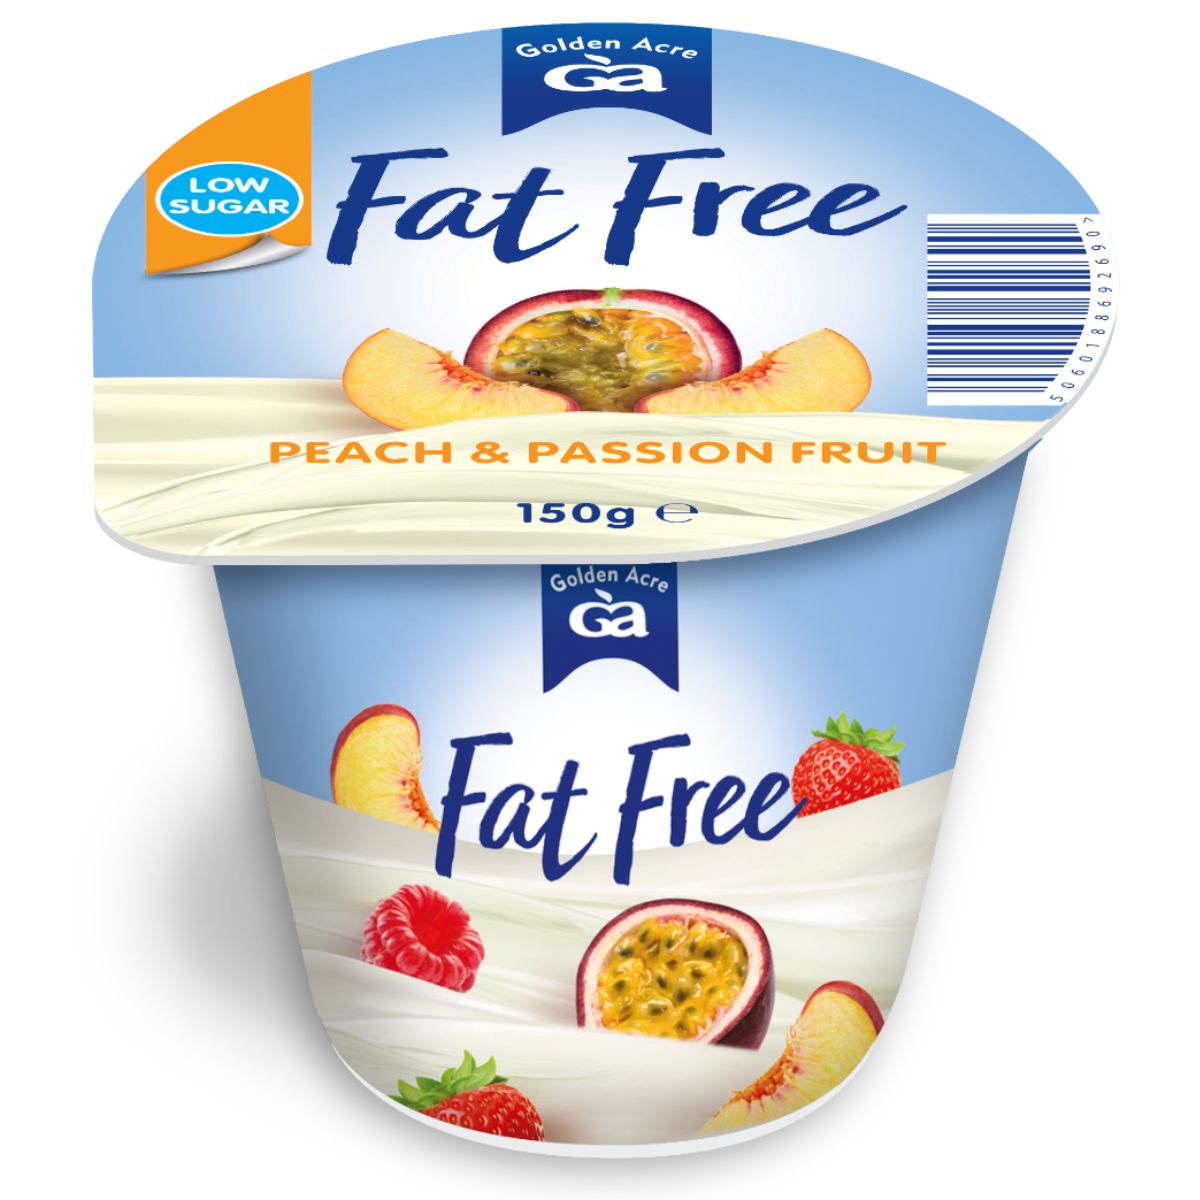 Golden Acre - Fat Free Peach and Passion Fruit Yoghurts - 150g.